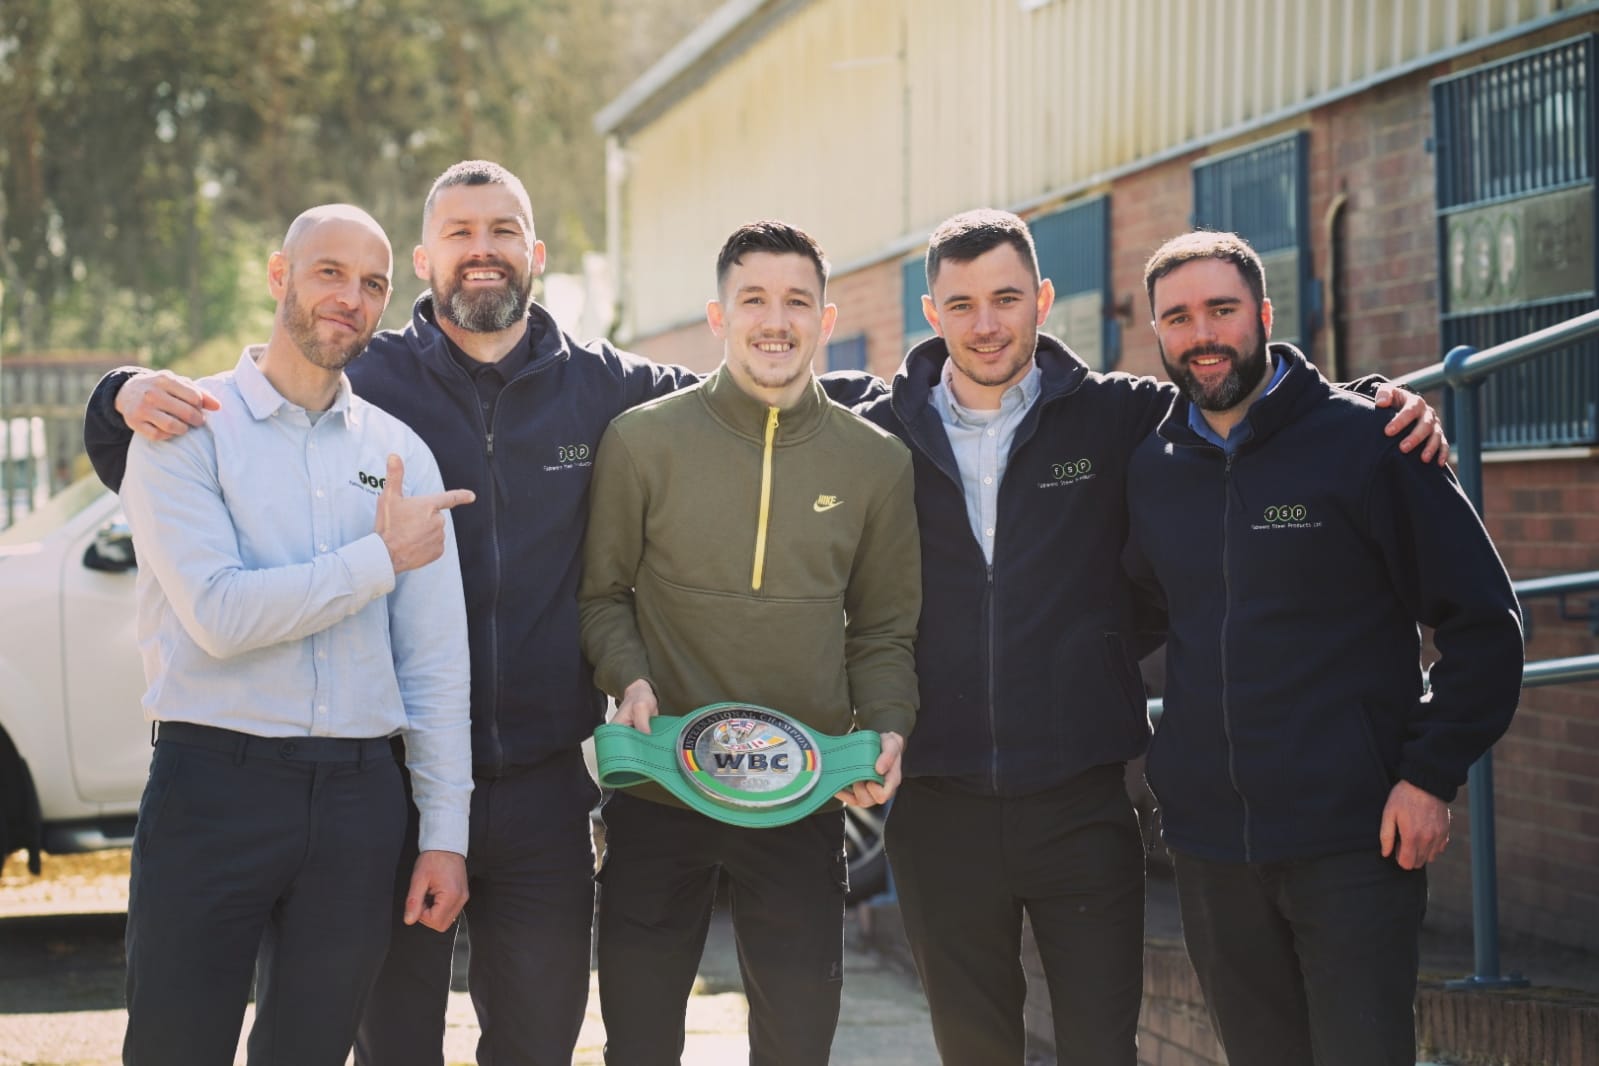 FSP provides knockout sponsorship to local boxer